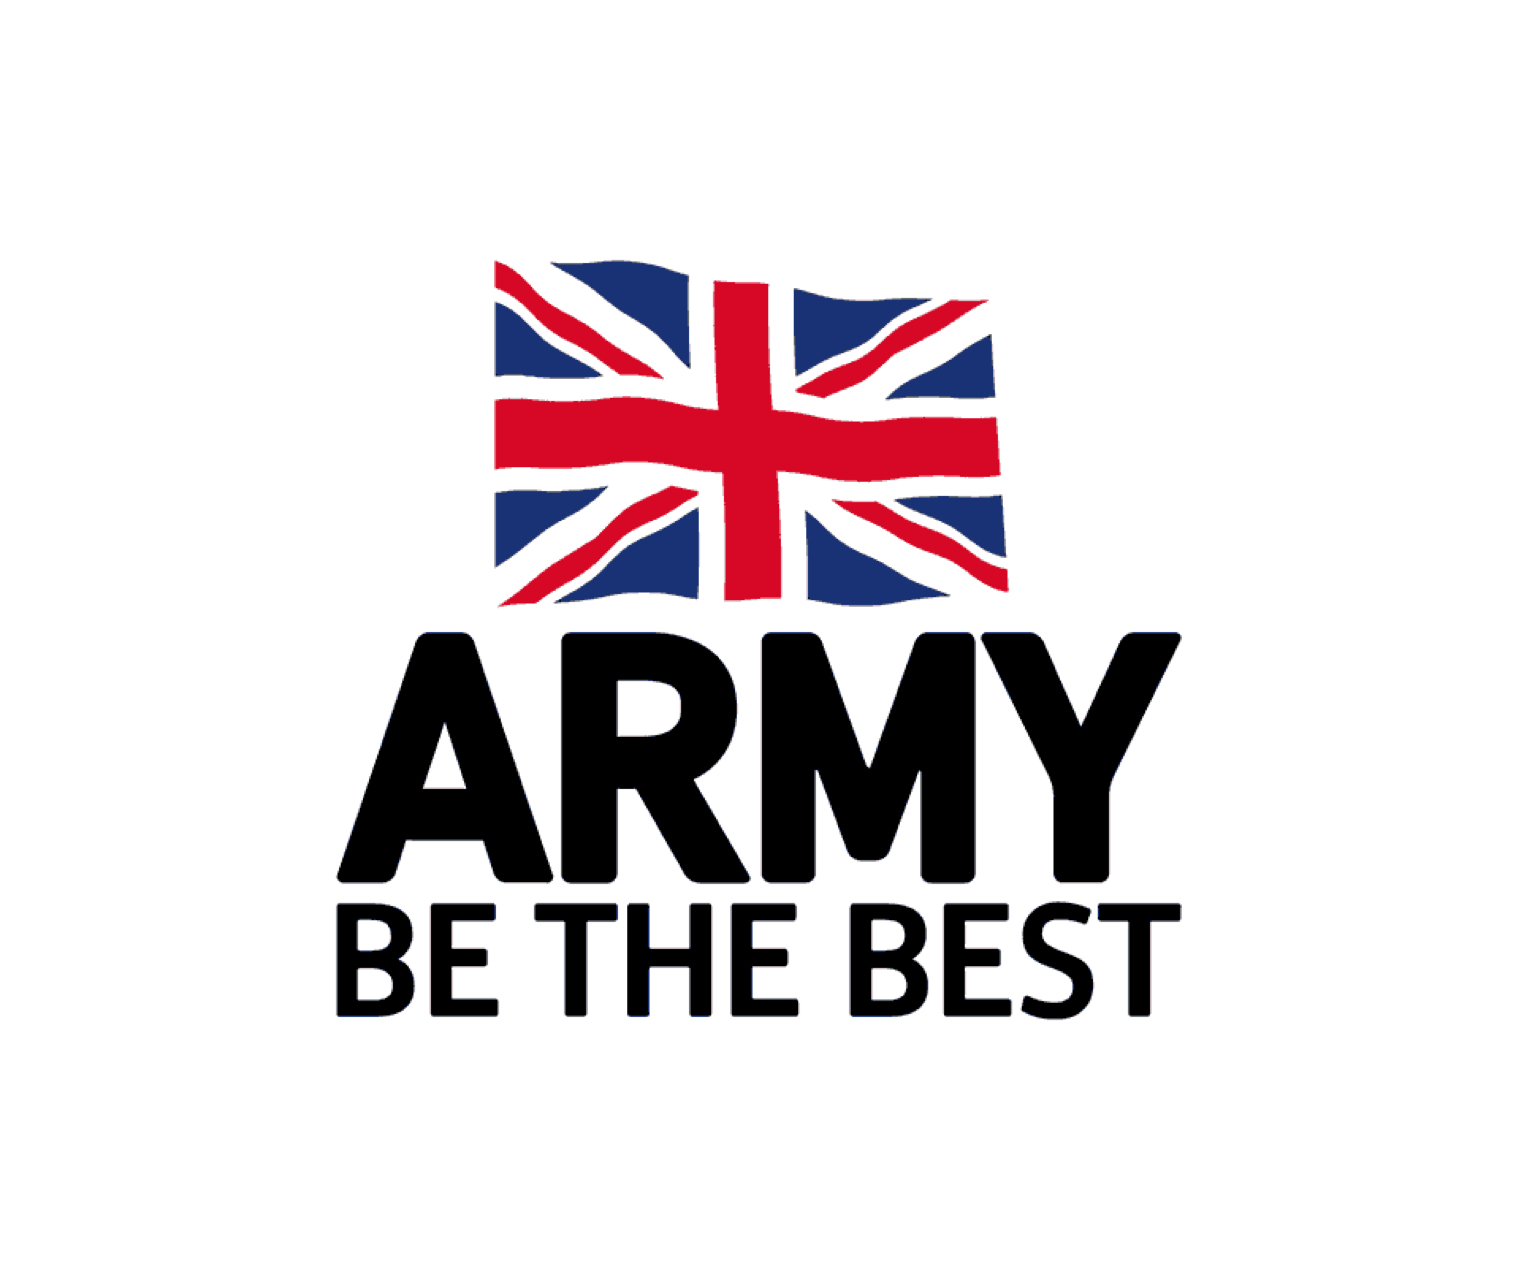 Army be the best logo.